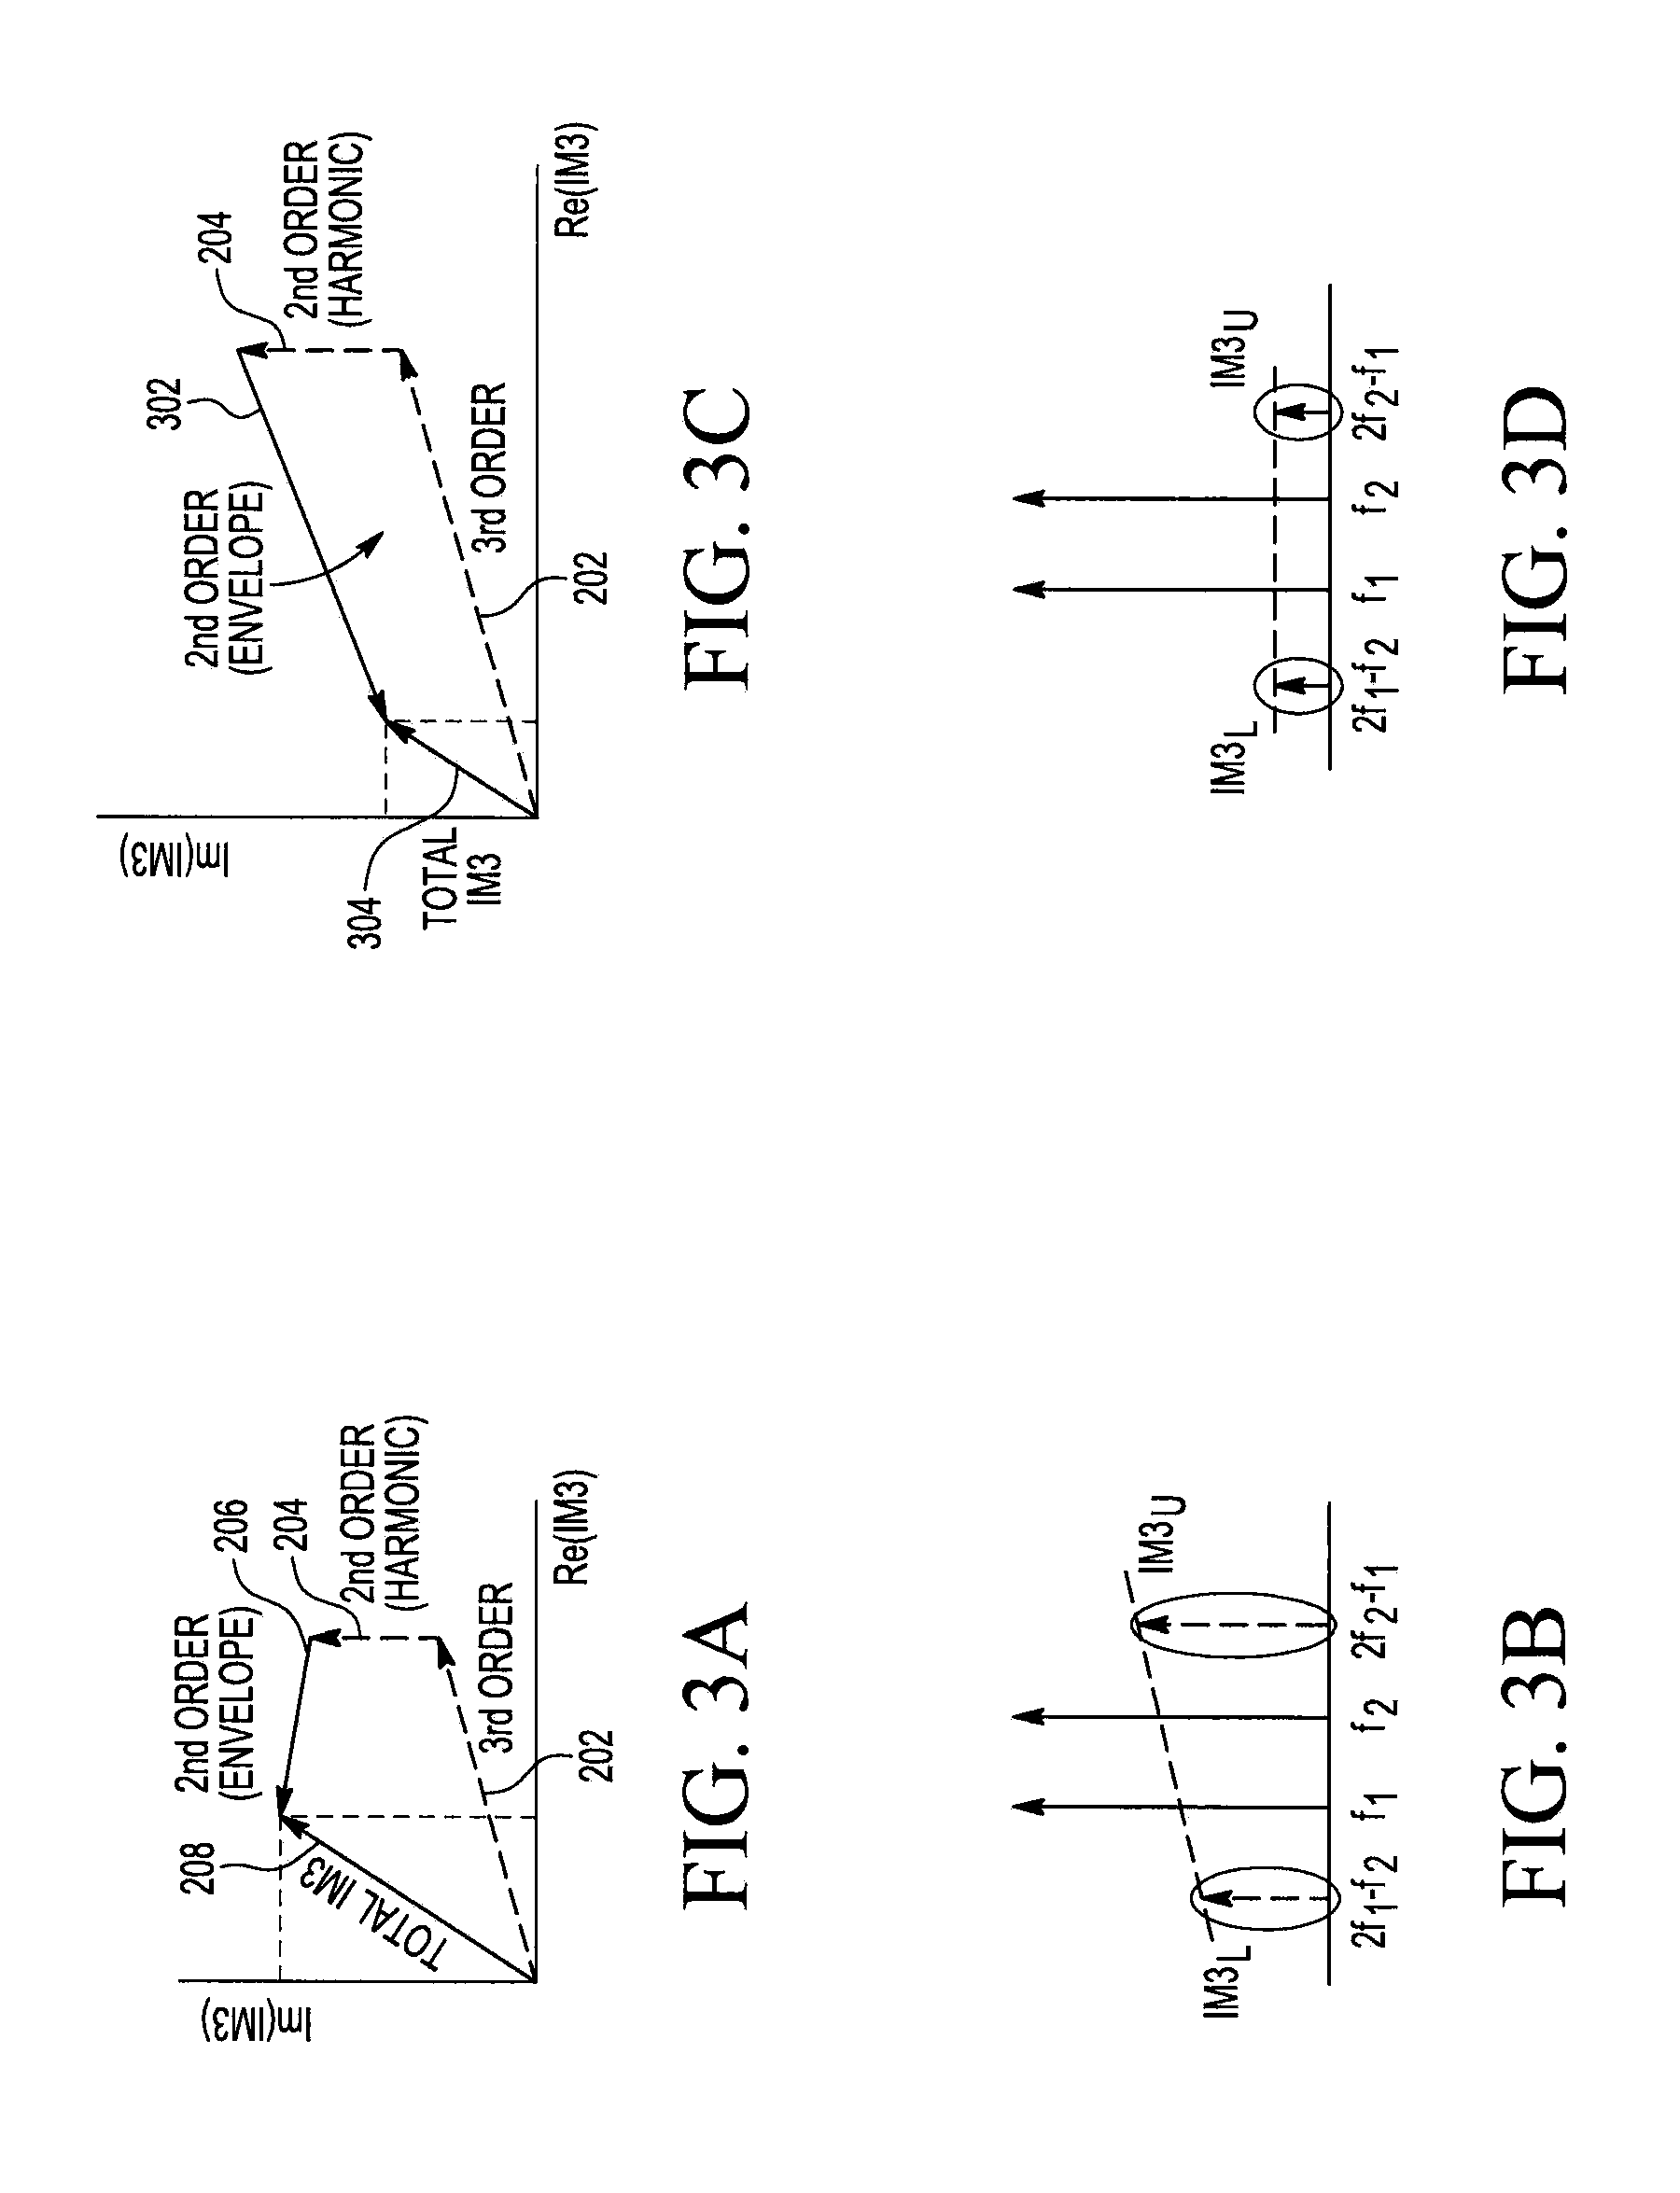 Power amplifier with envelope injection